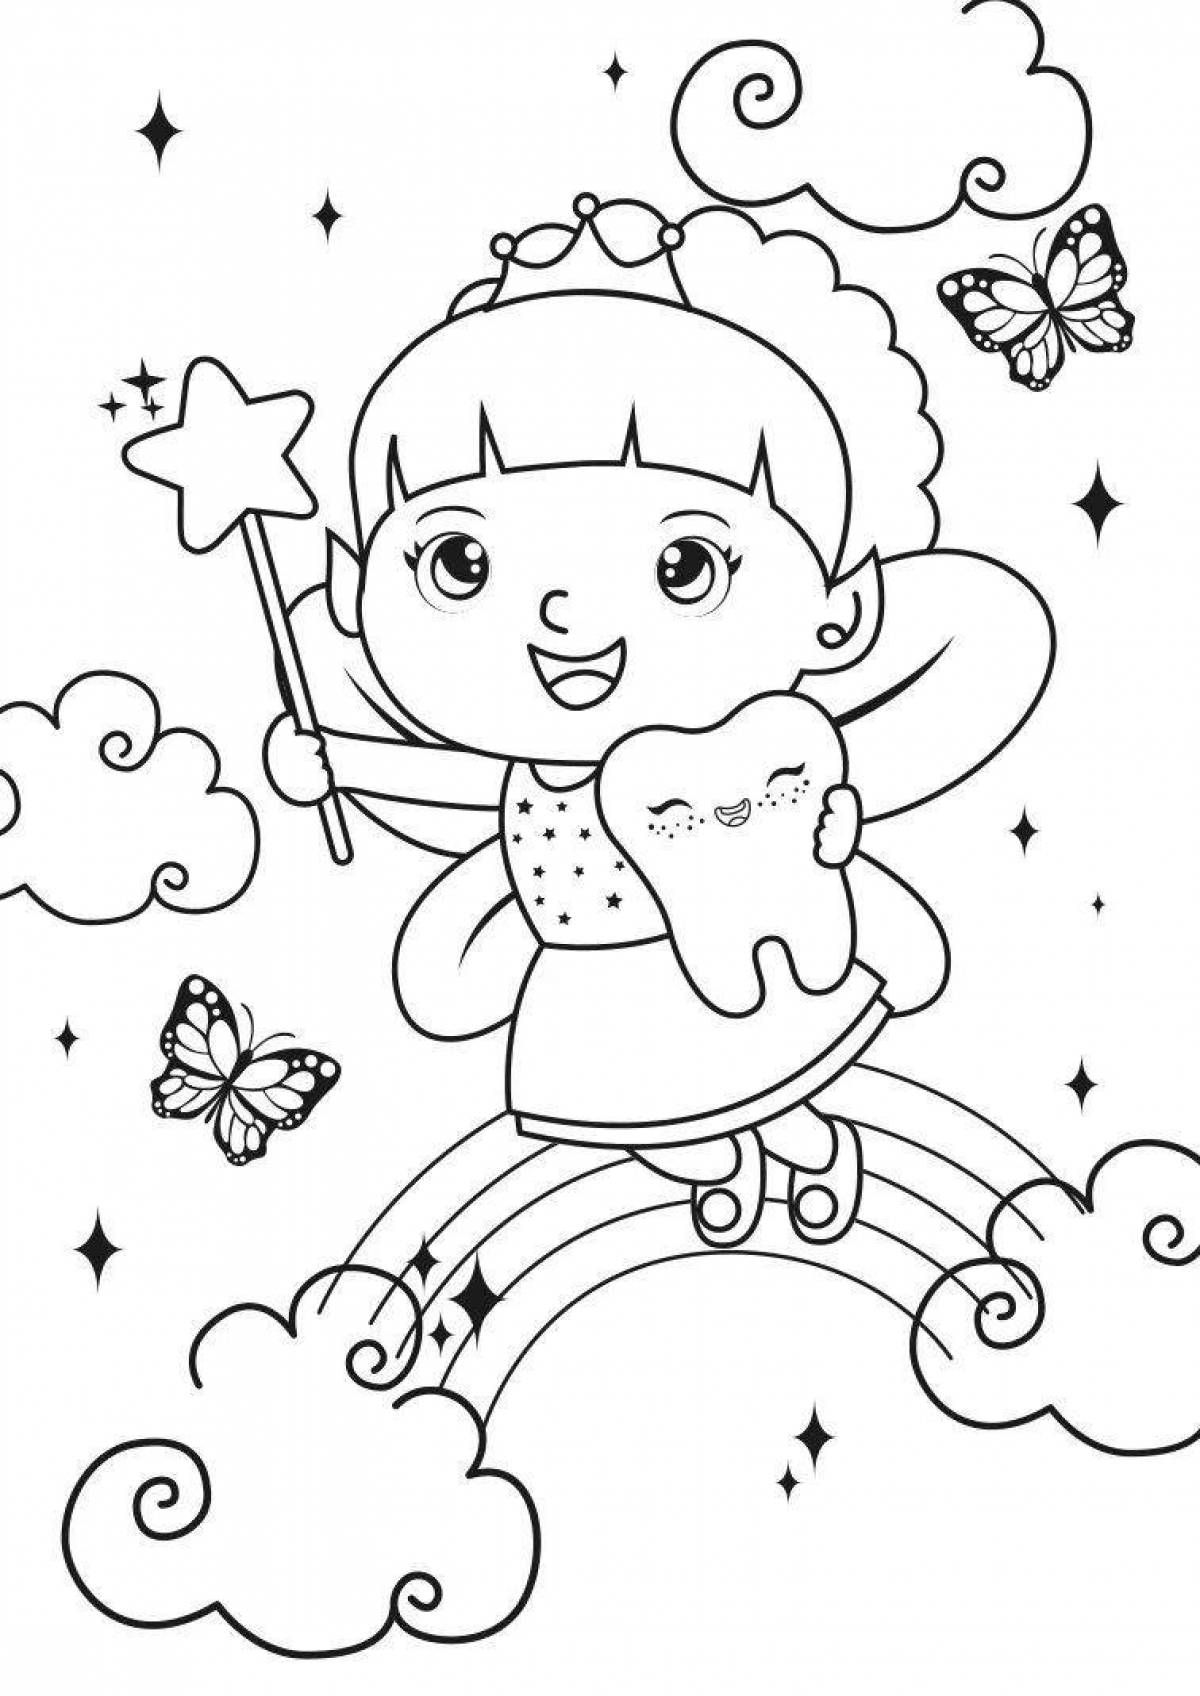 Adorable fairy tooth coloring book for kids